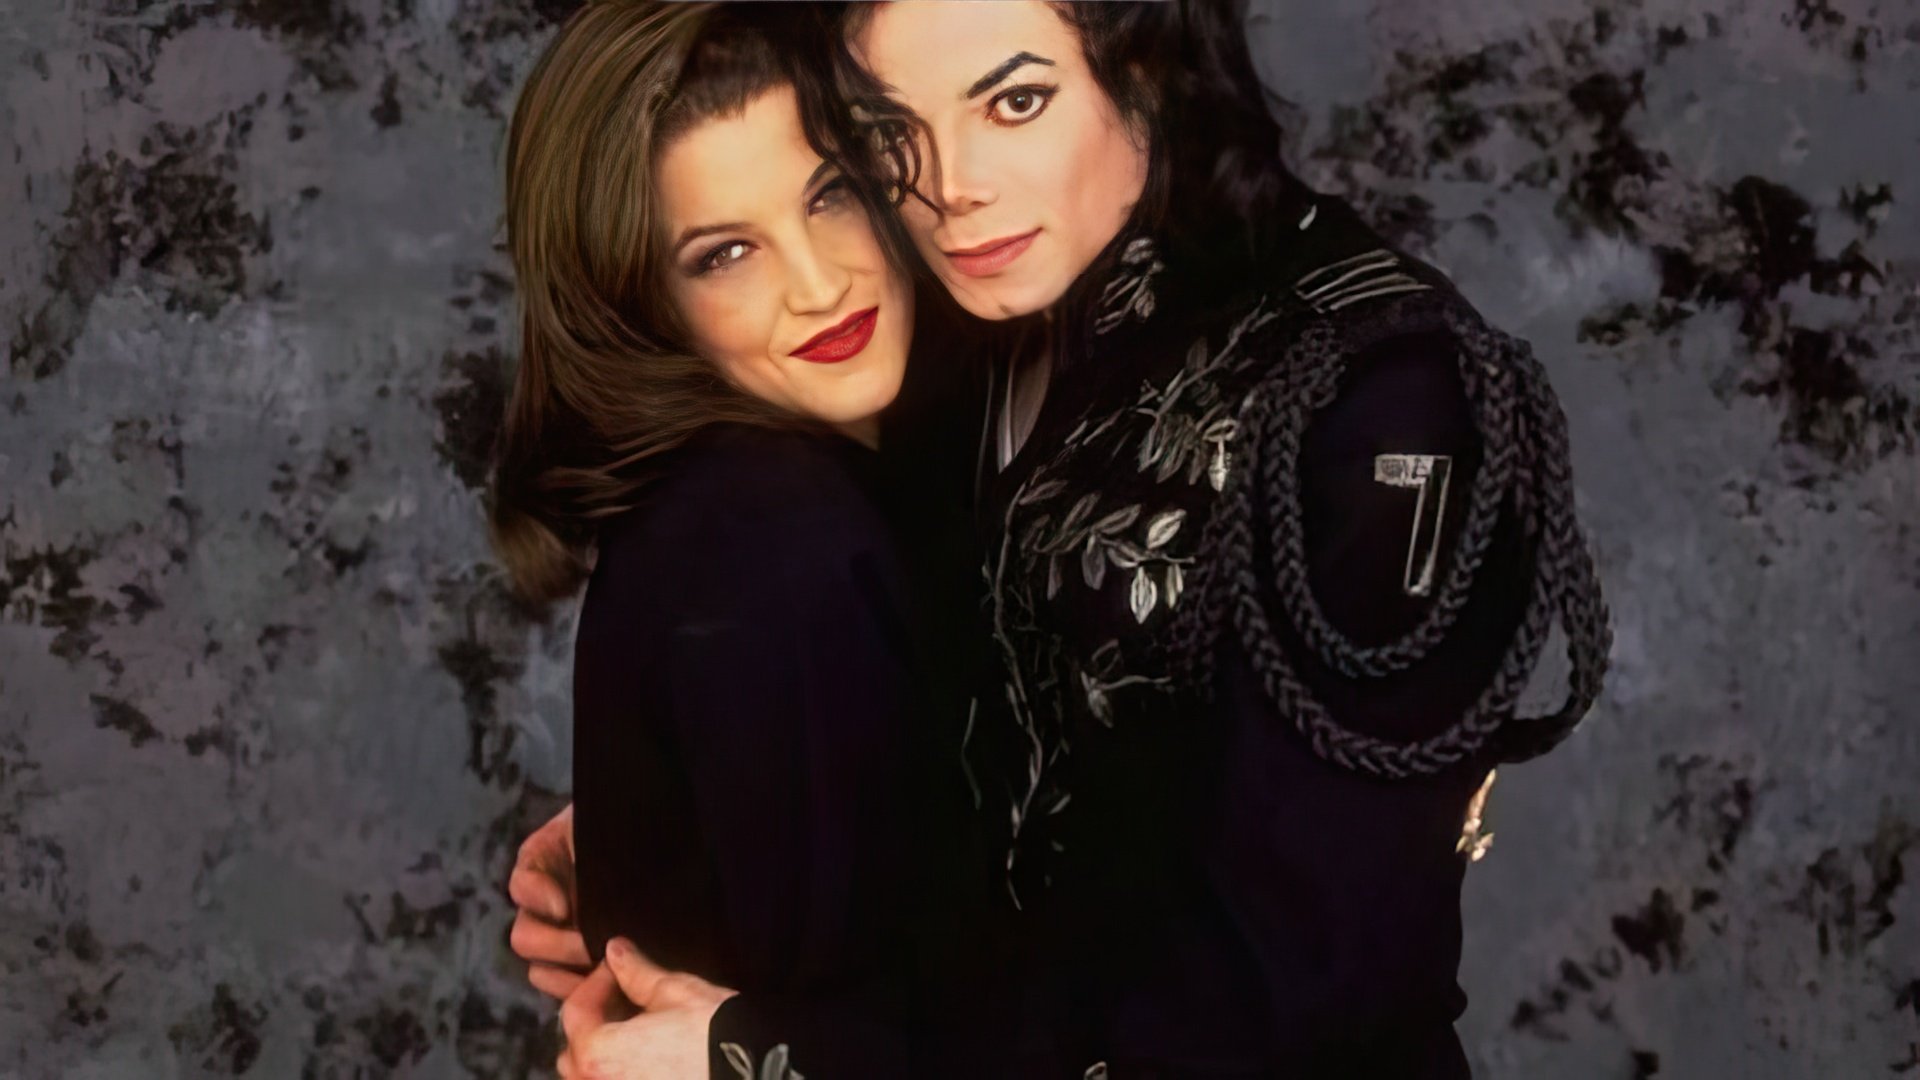 Michael Jackson and Lisa Marie Presley remained friends